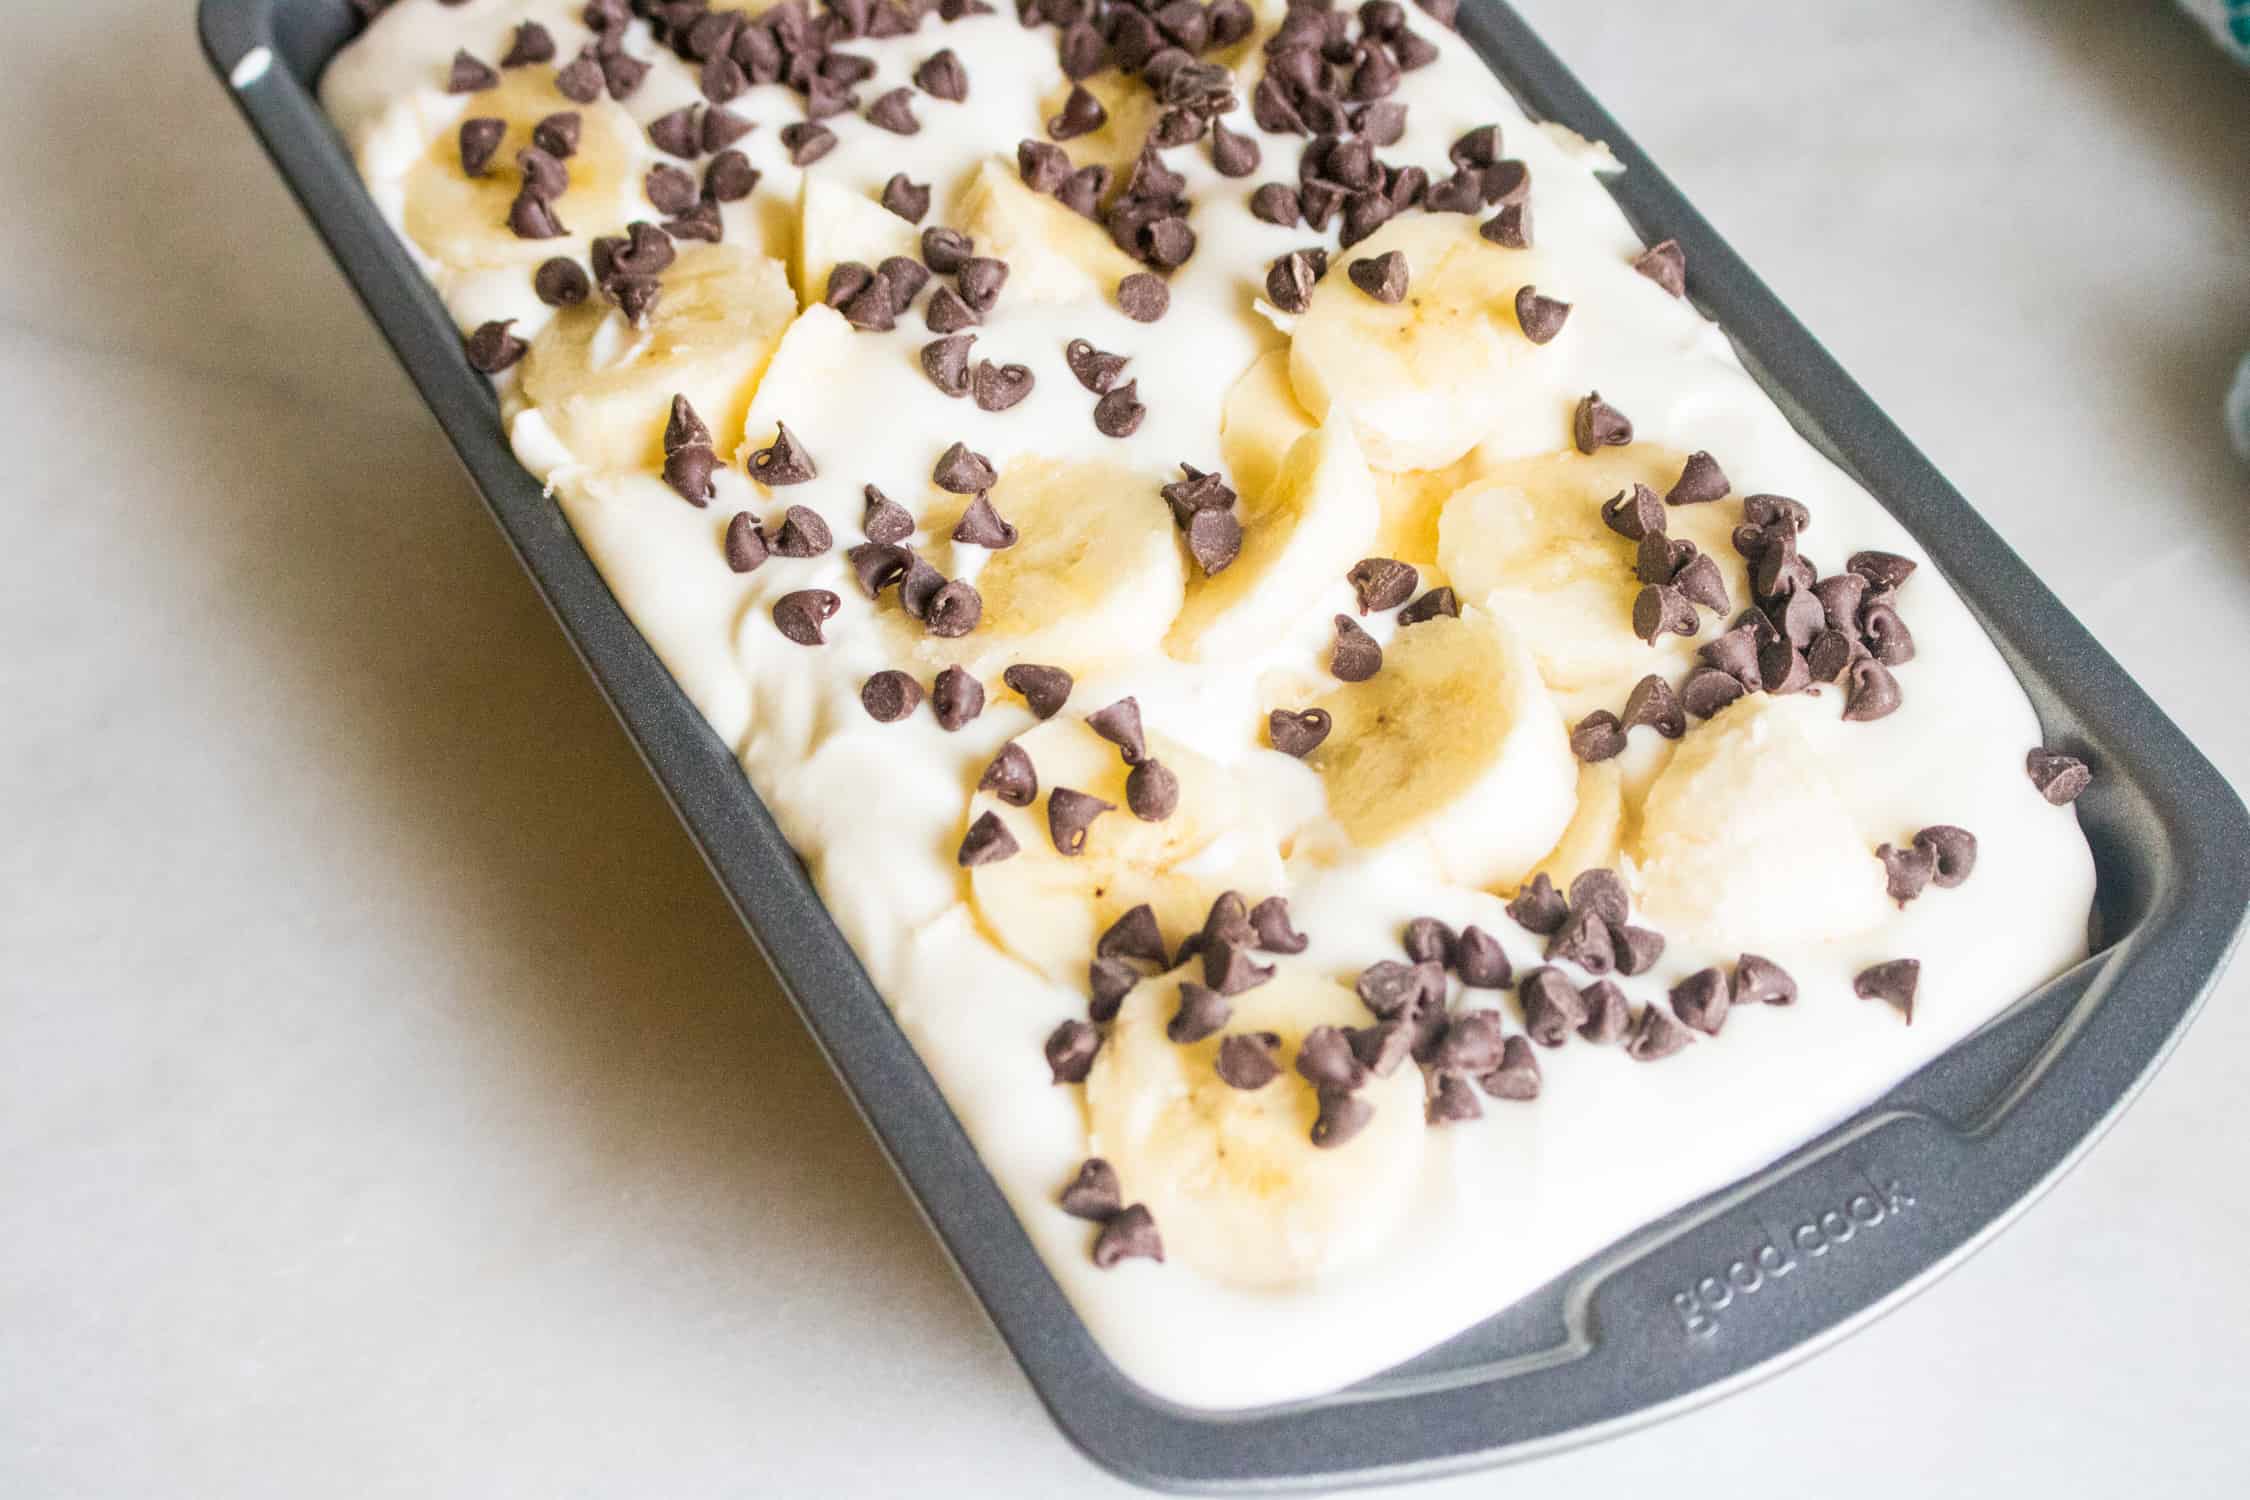 No-churn banana chocolate chip ice cream in a bread pan topped with sliced bananas and chocolate chips